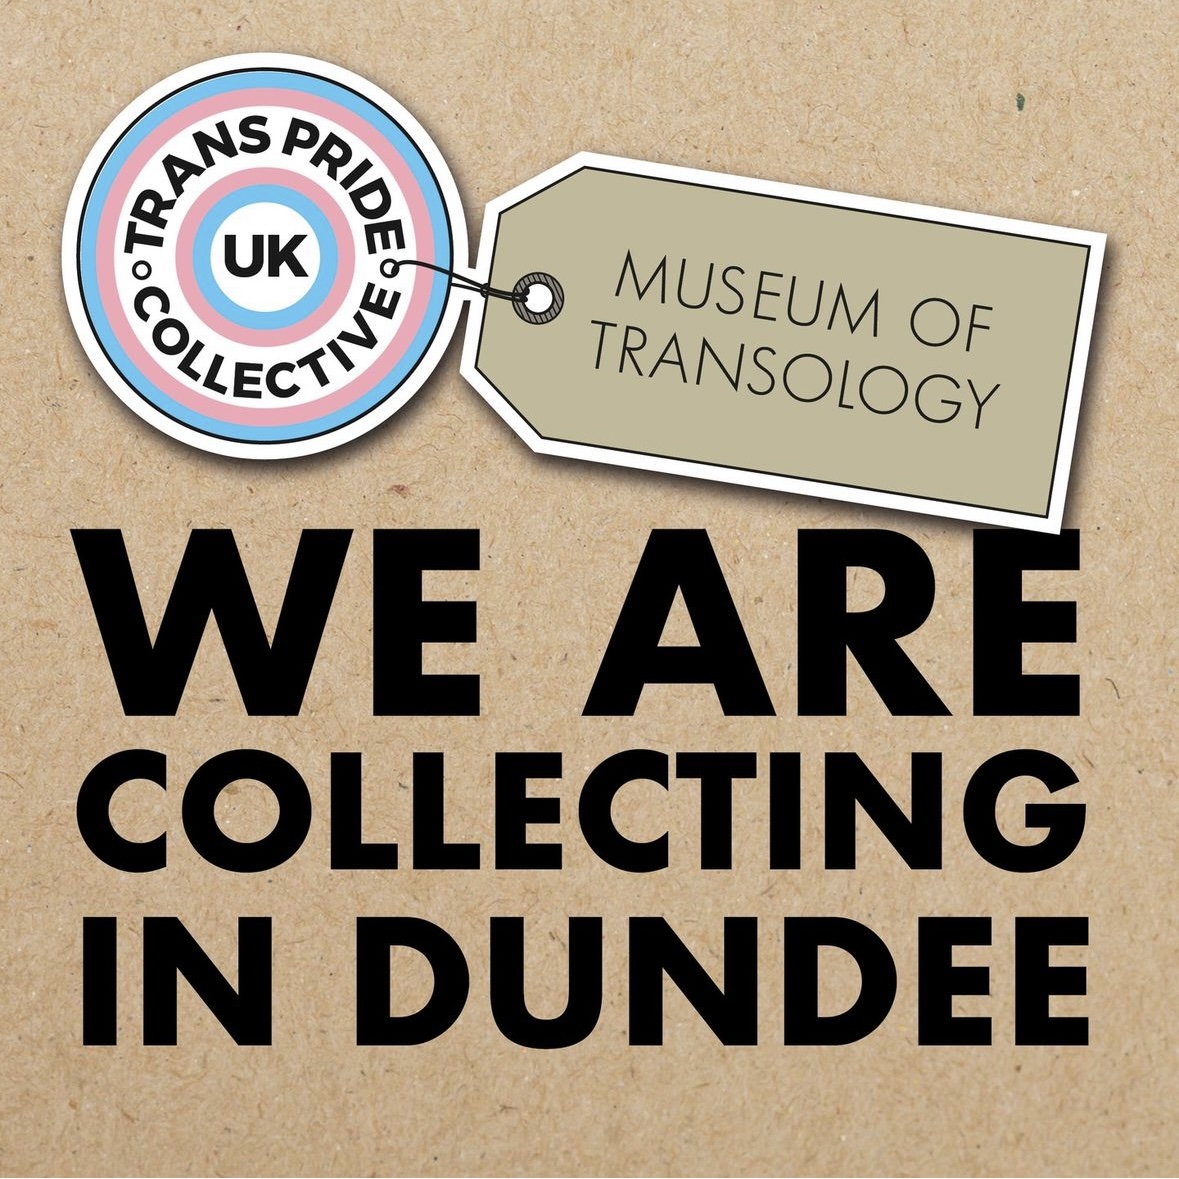 The Museum of Transology is collaborating with Trans Pride UK to build local trans collections 🏳️‍⚧️ The @MoTransology are in the museum on Saturday 20 April, come along to donate your objects and leave a legacy of trans joy for the future. Find out more: va.scot/3W2Rx2H